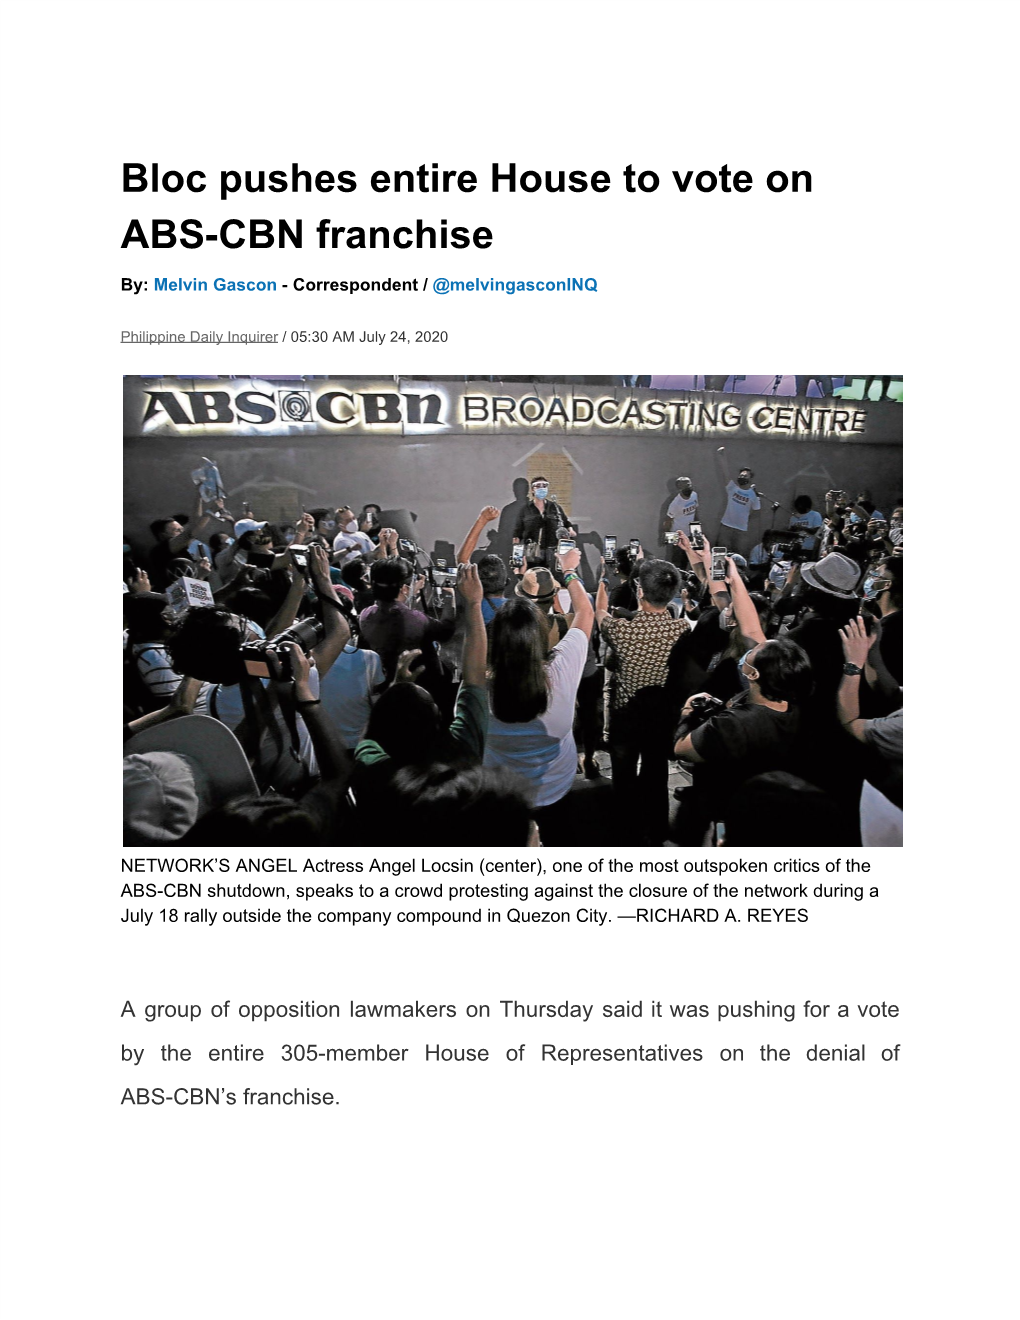 Bloc Pushes Entire House to Vote on ABS-CBN Franchise